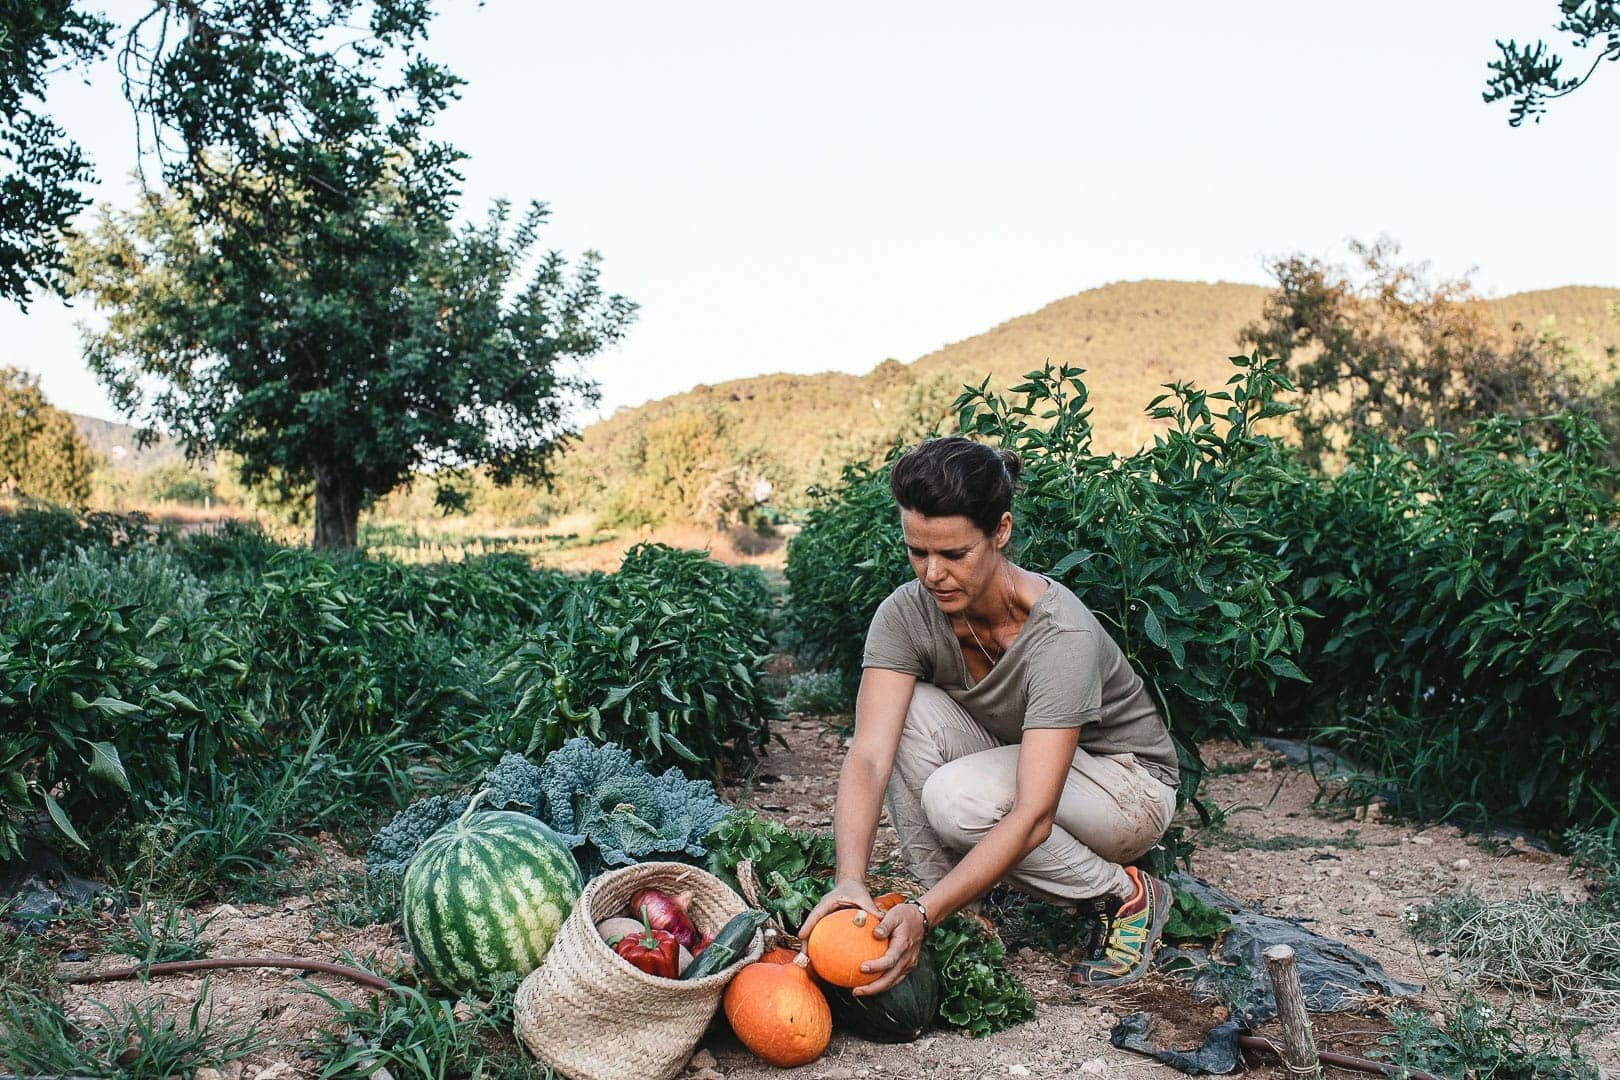 Photograph of Marina harvesting vegetables from her Can Puvil vegetable garden in Ibiza.